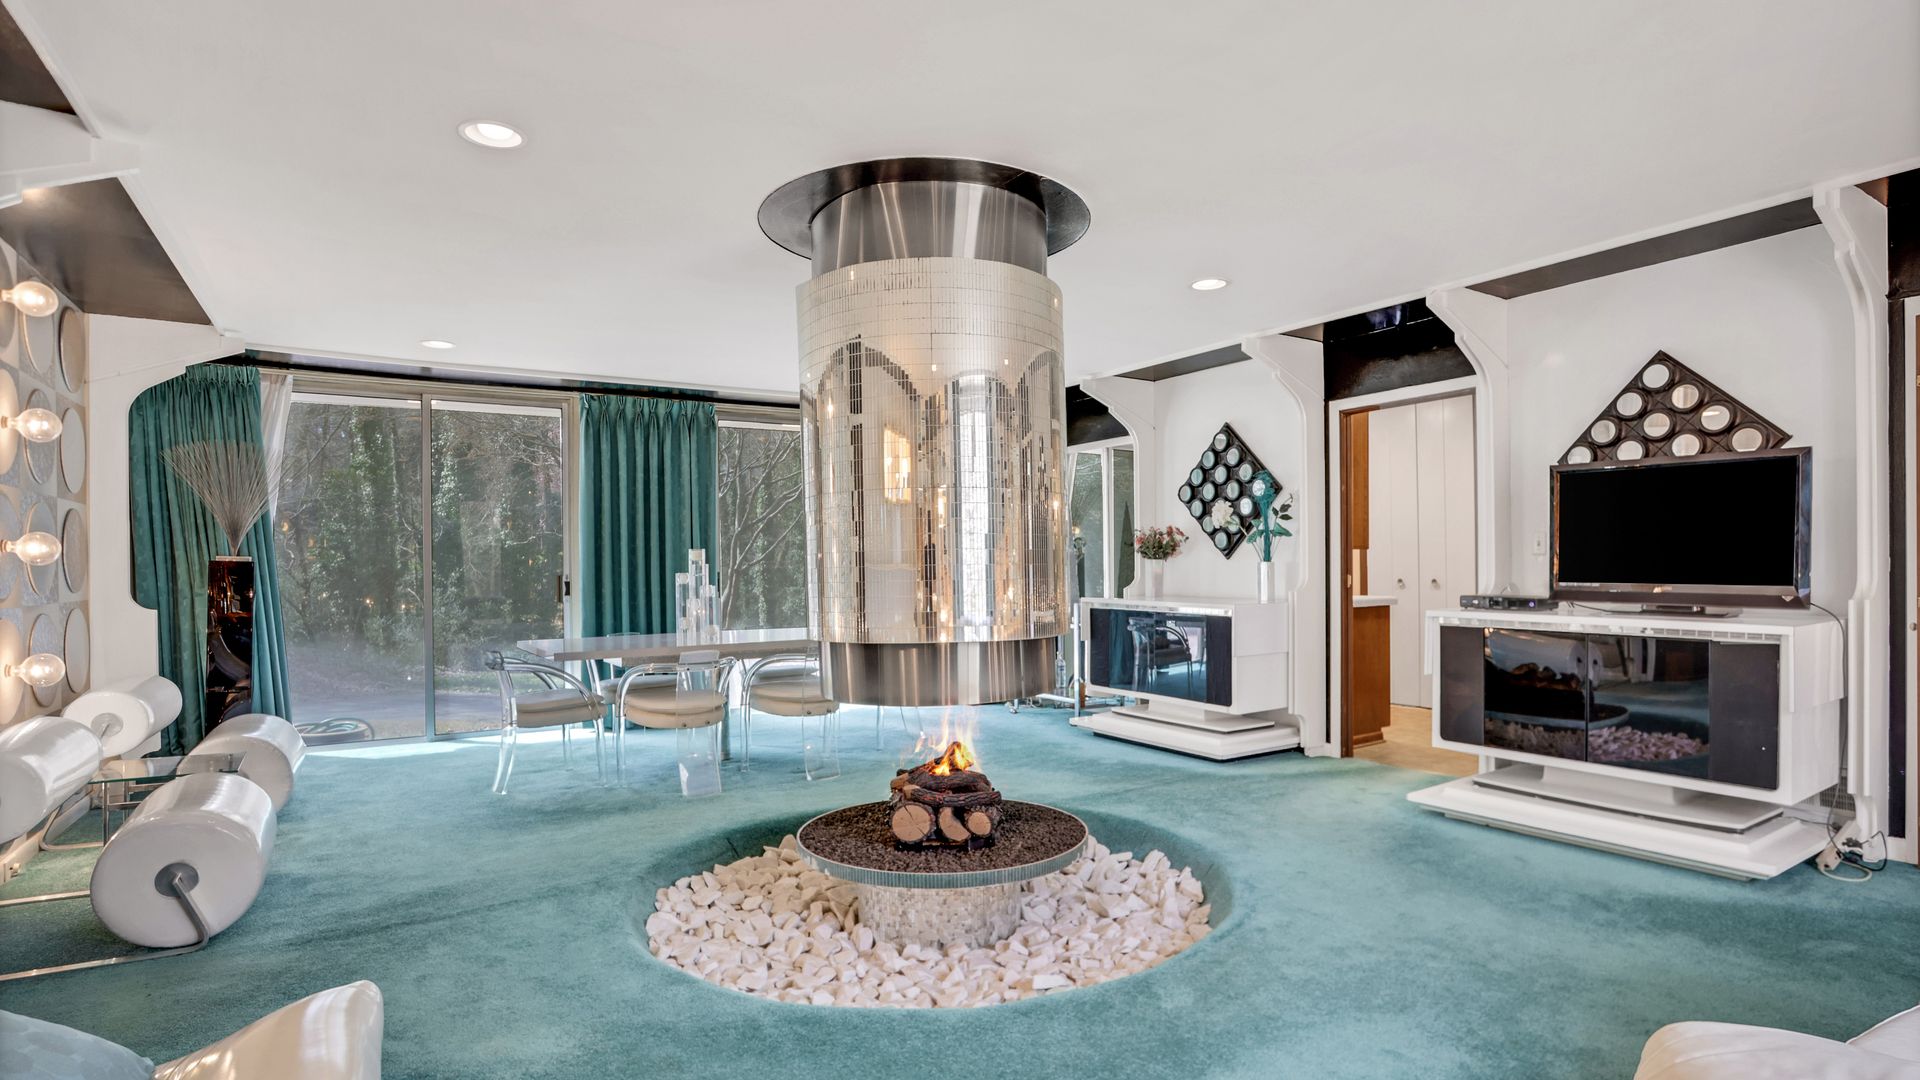 A mid-century living room with aqua shag carpet, white ceiling, and cylindrical hanging fireplace with mirrored tiles